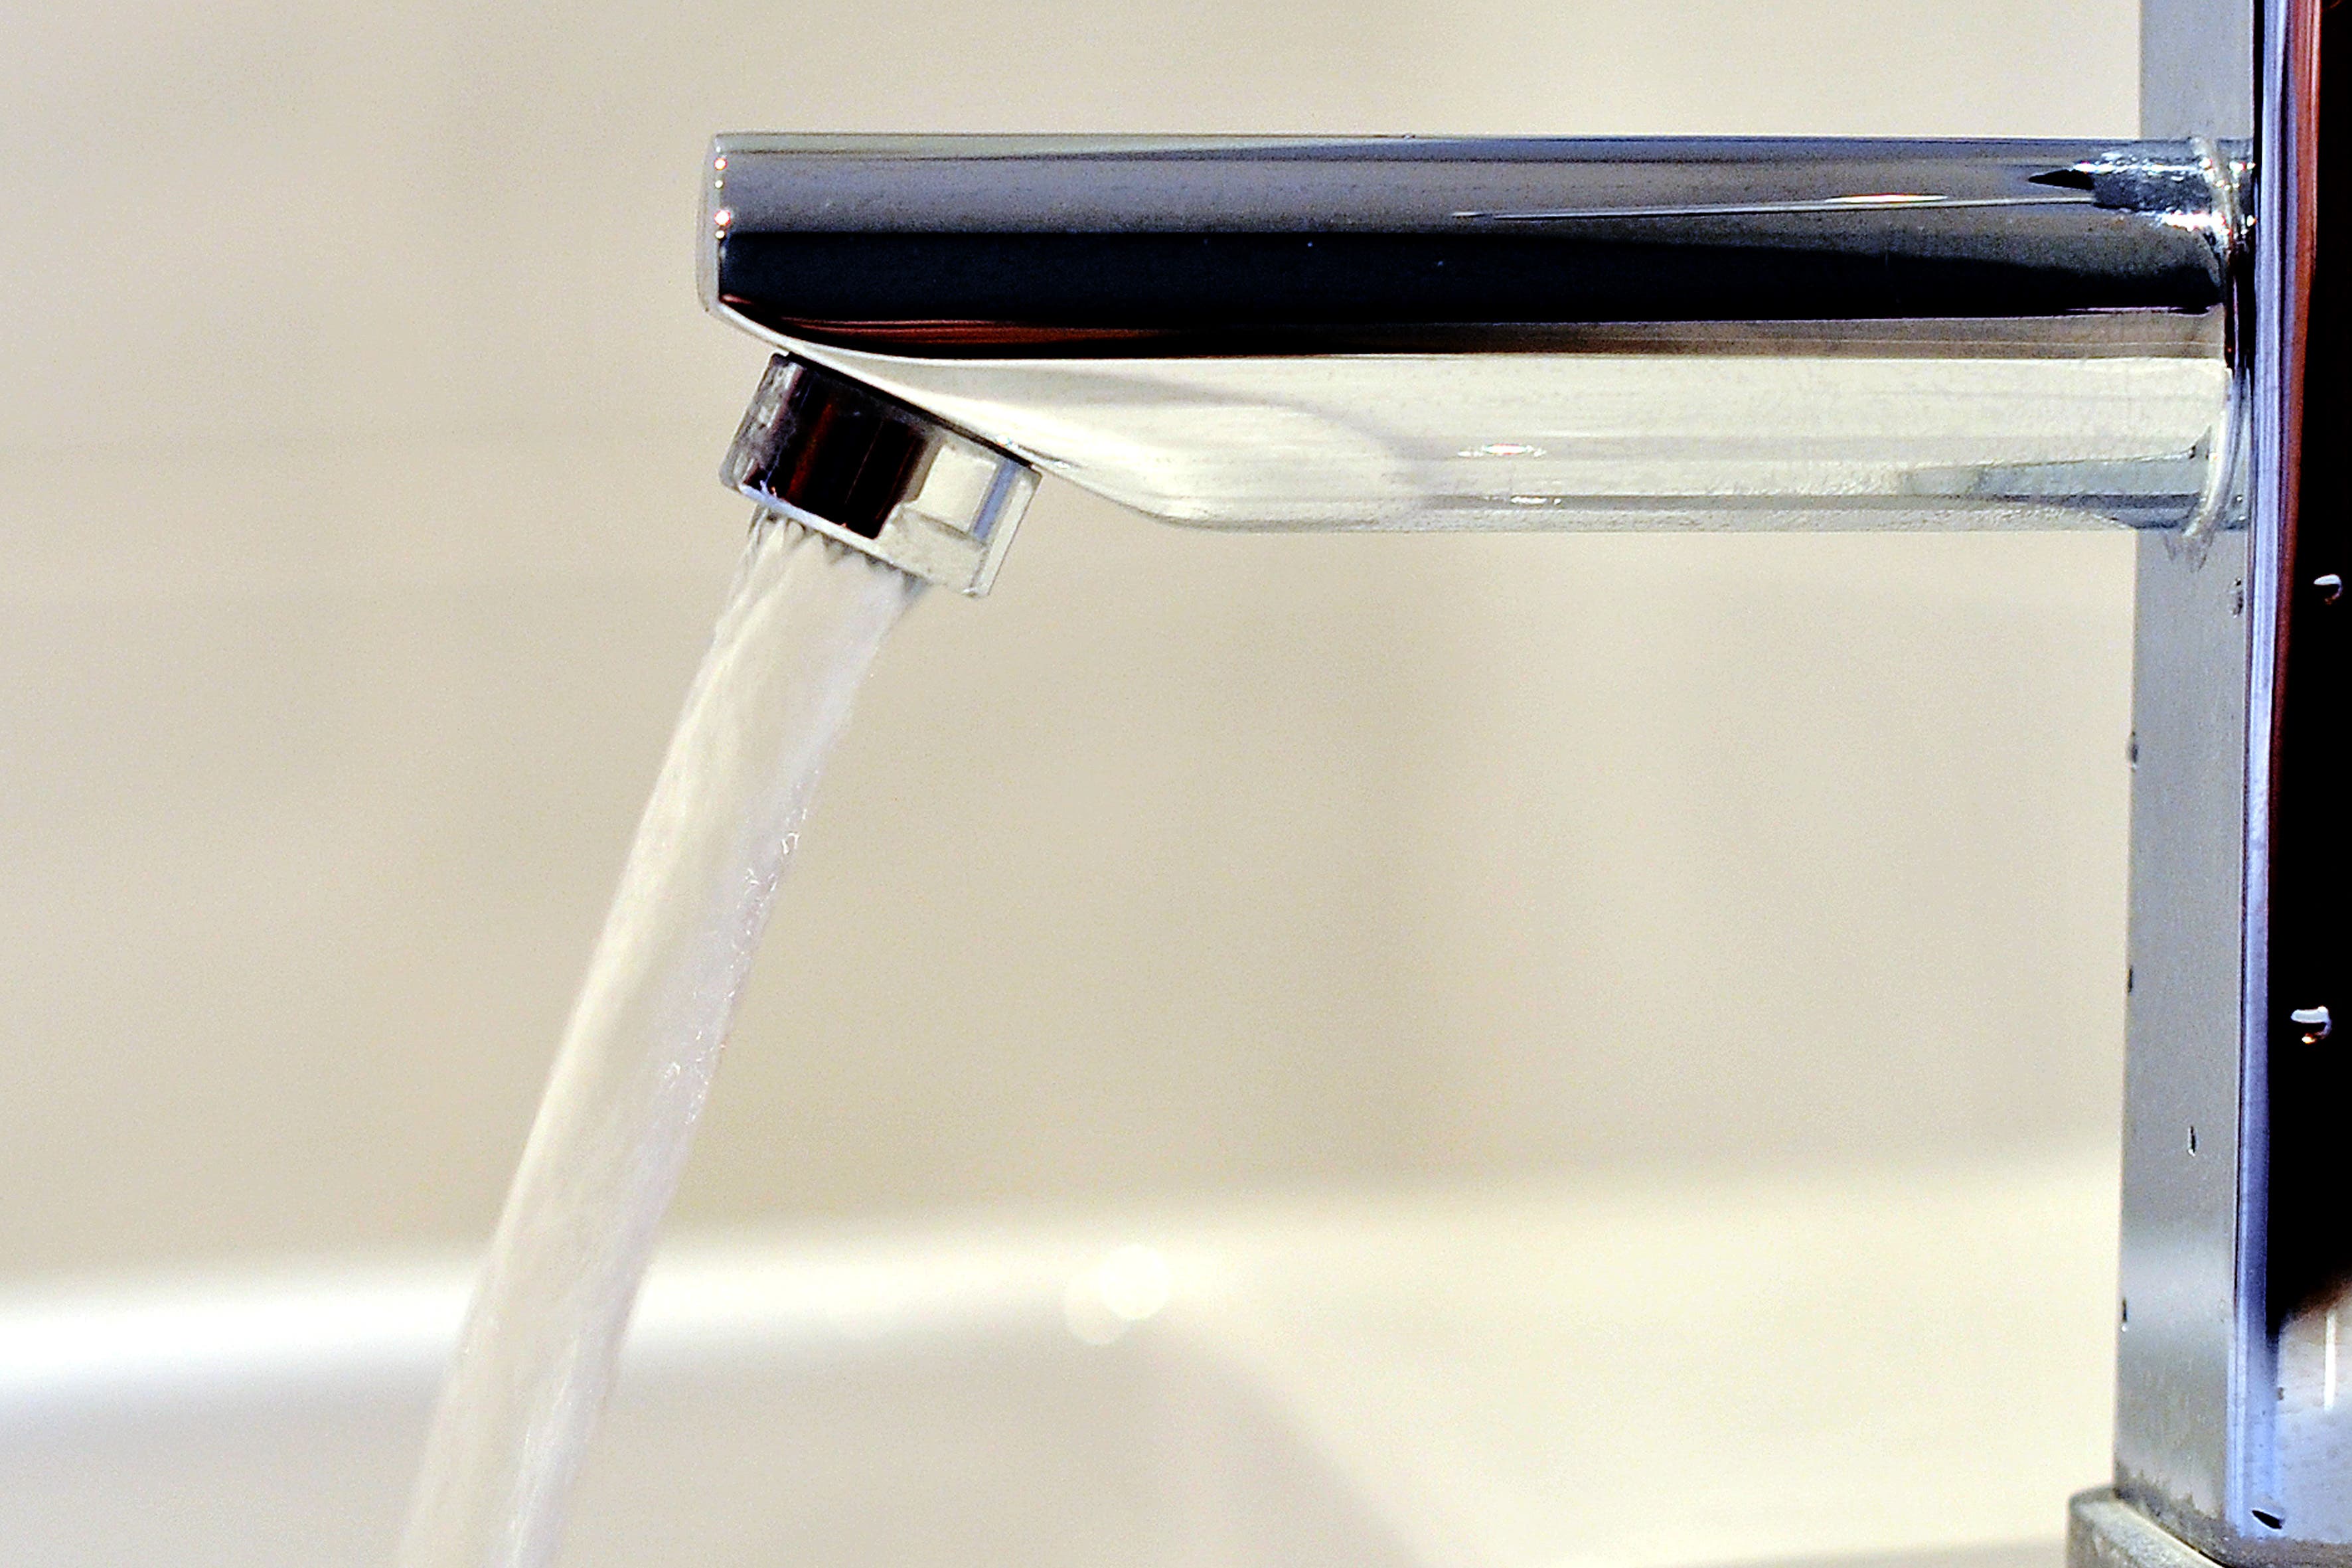 Some 200 properties in Monmouthshire were still without water on Boxing Day